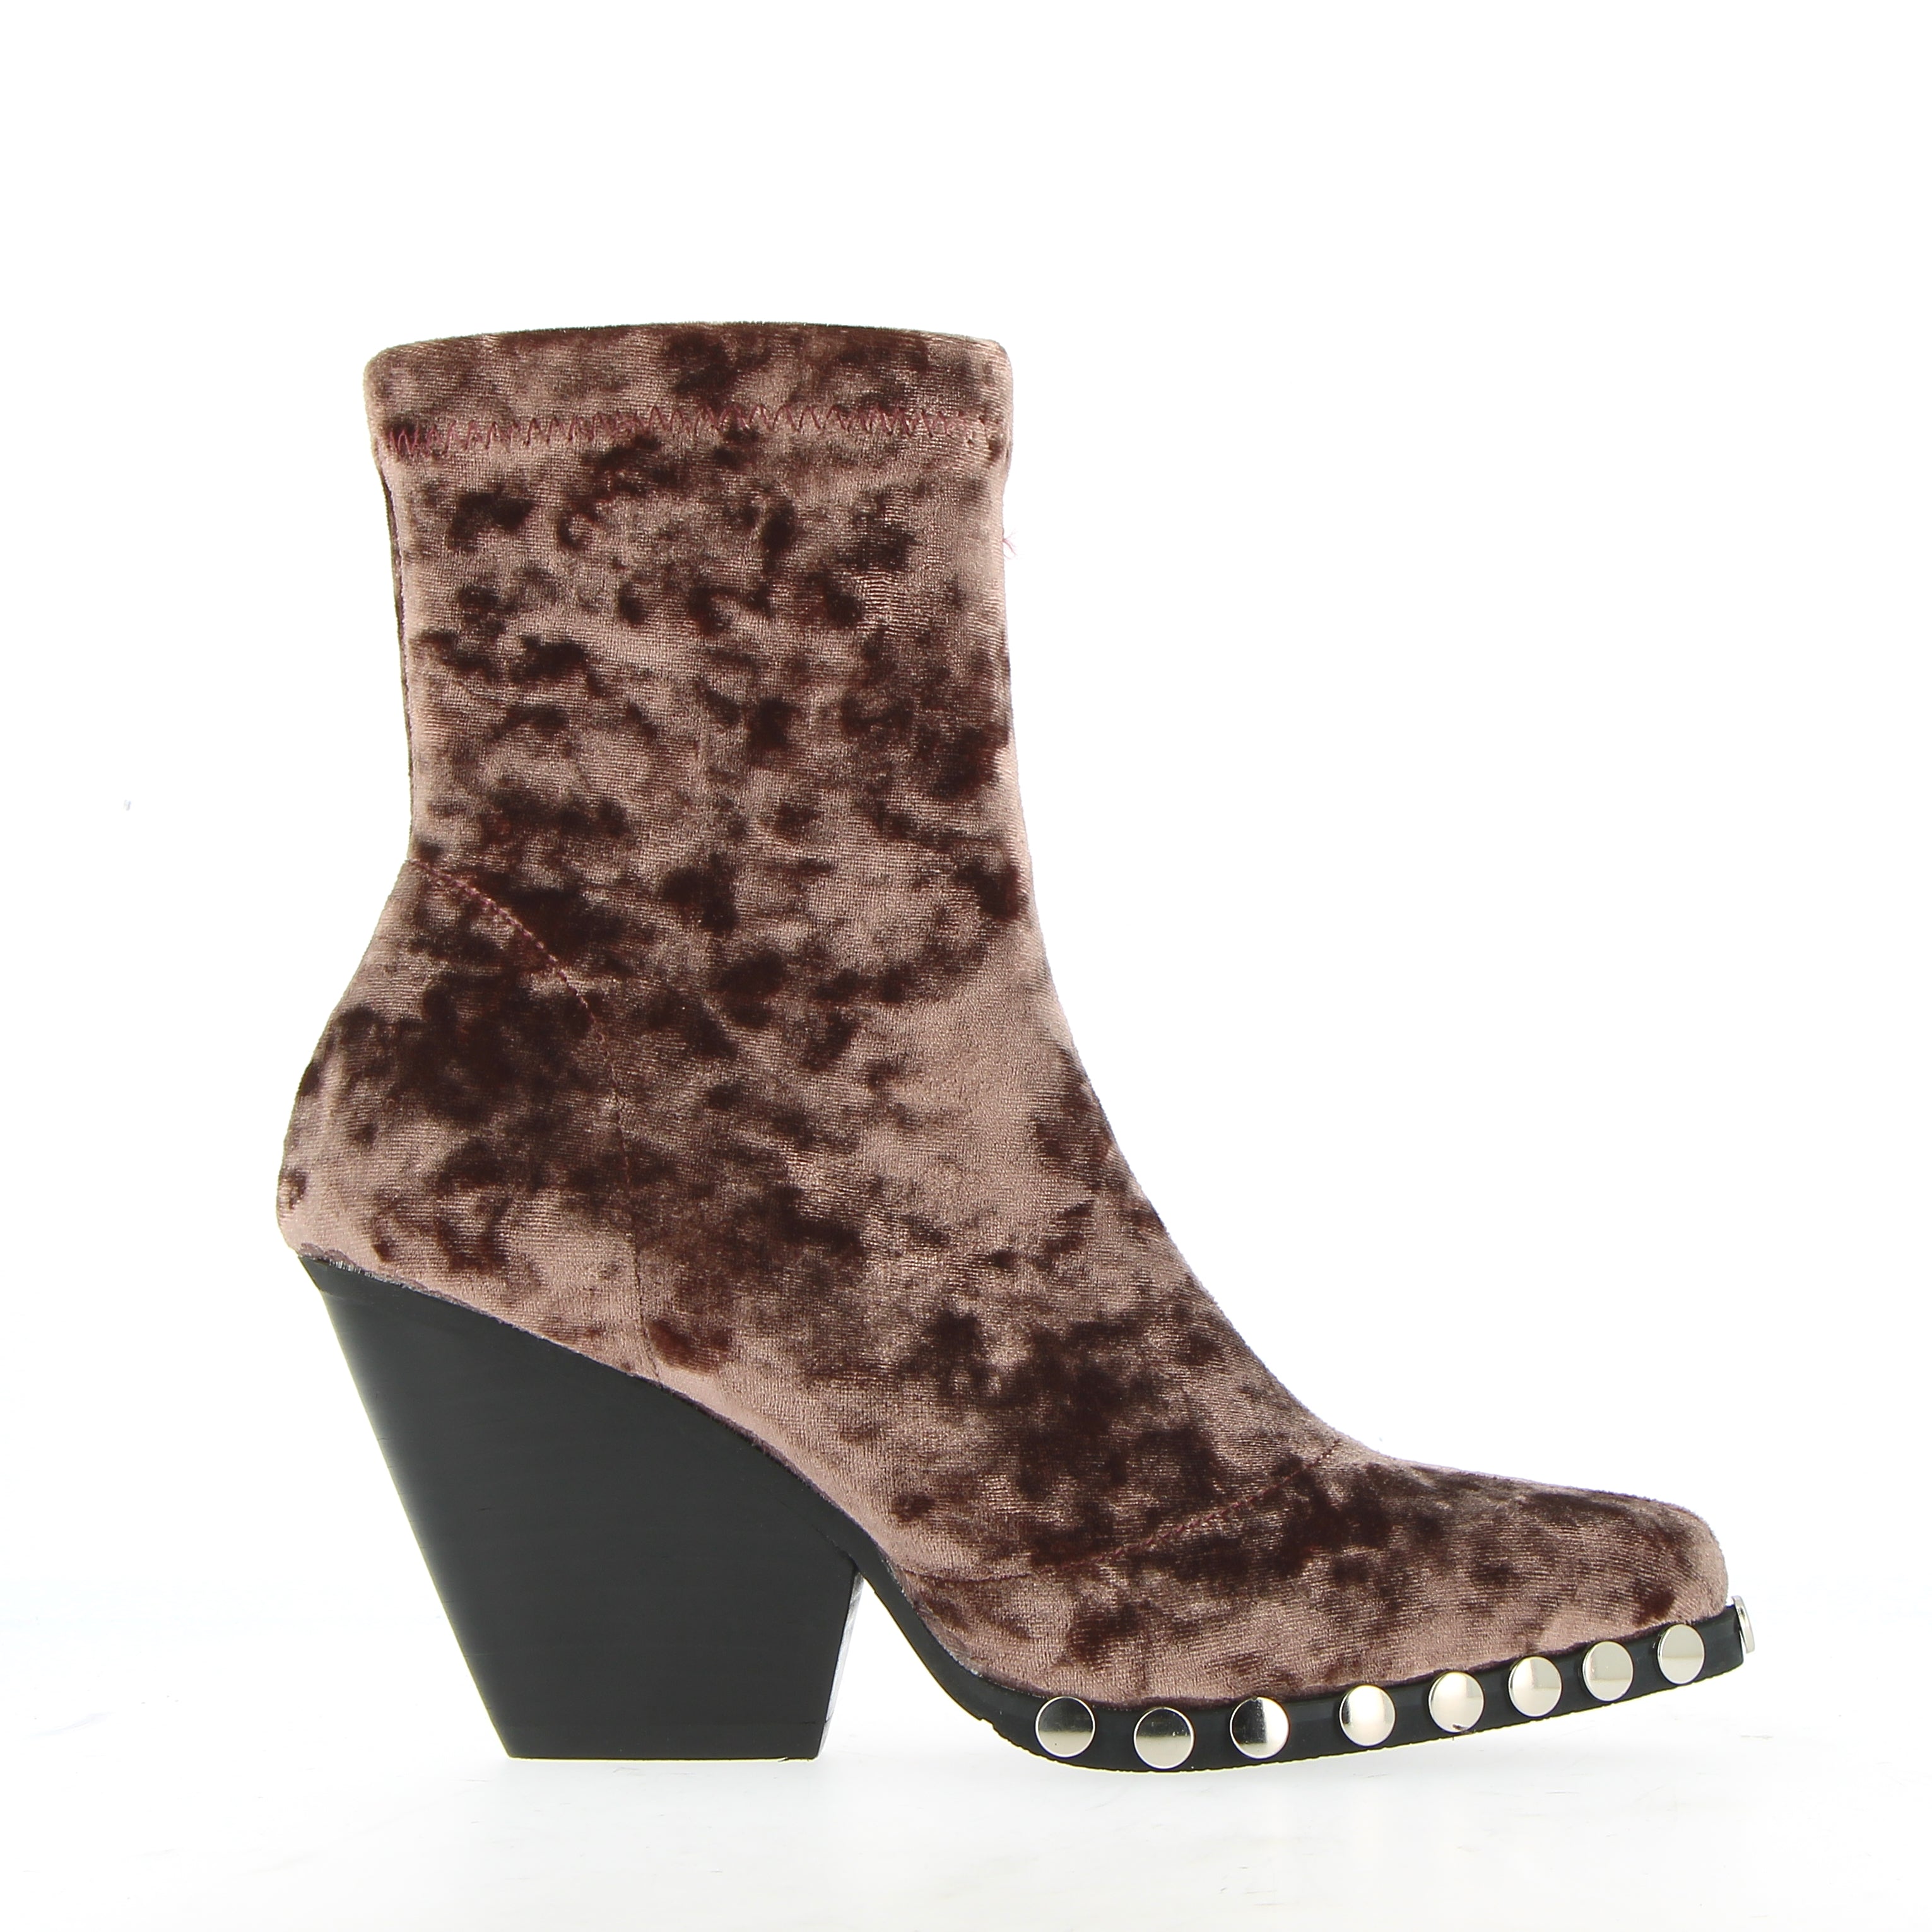 Taupe stretch velvet ankle boot with studs on the profile